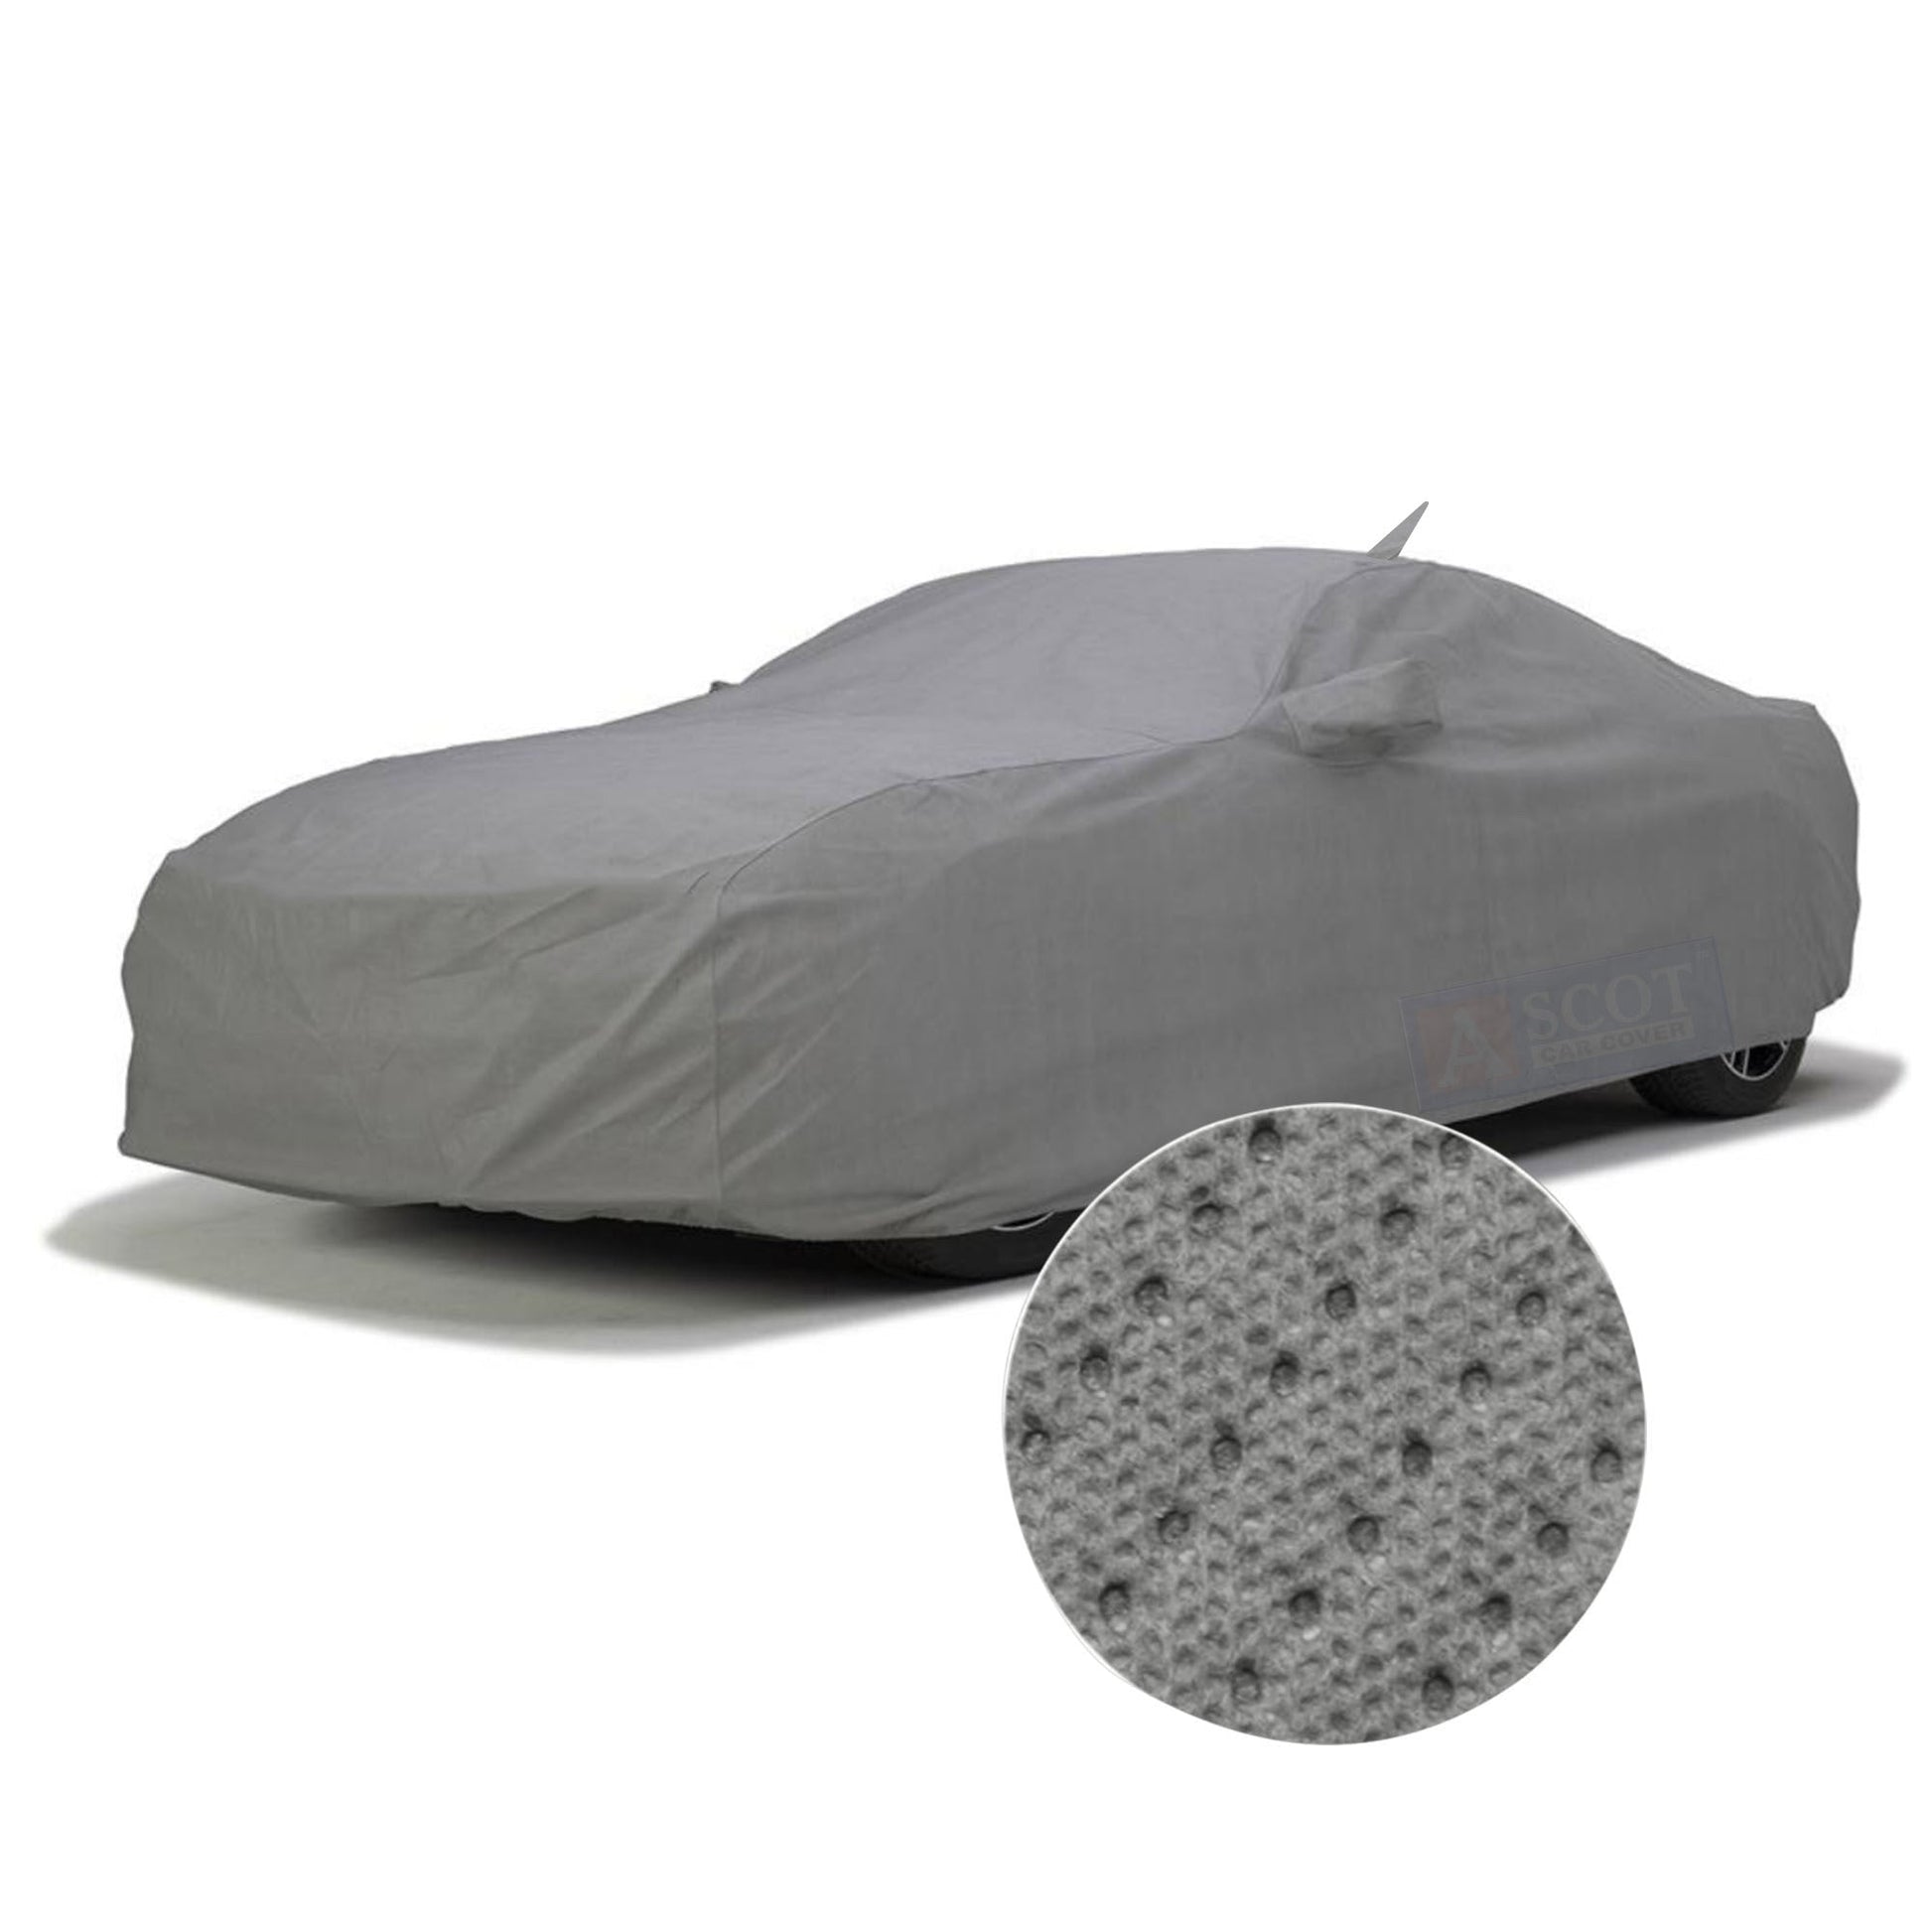 Z Tech Car Cover For Mercedes Benz B-Class (Without Mirror Pockets) Price  in India - Buy Z Tech Car Cover For Mercedes Benz B-Class (Without Mirror  Pockets) online at